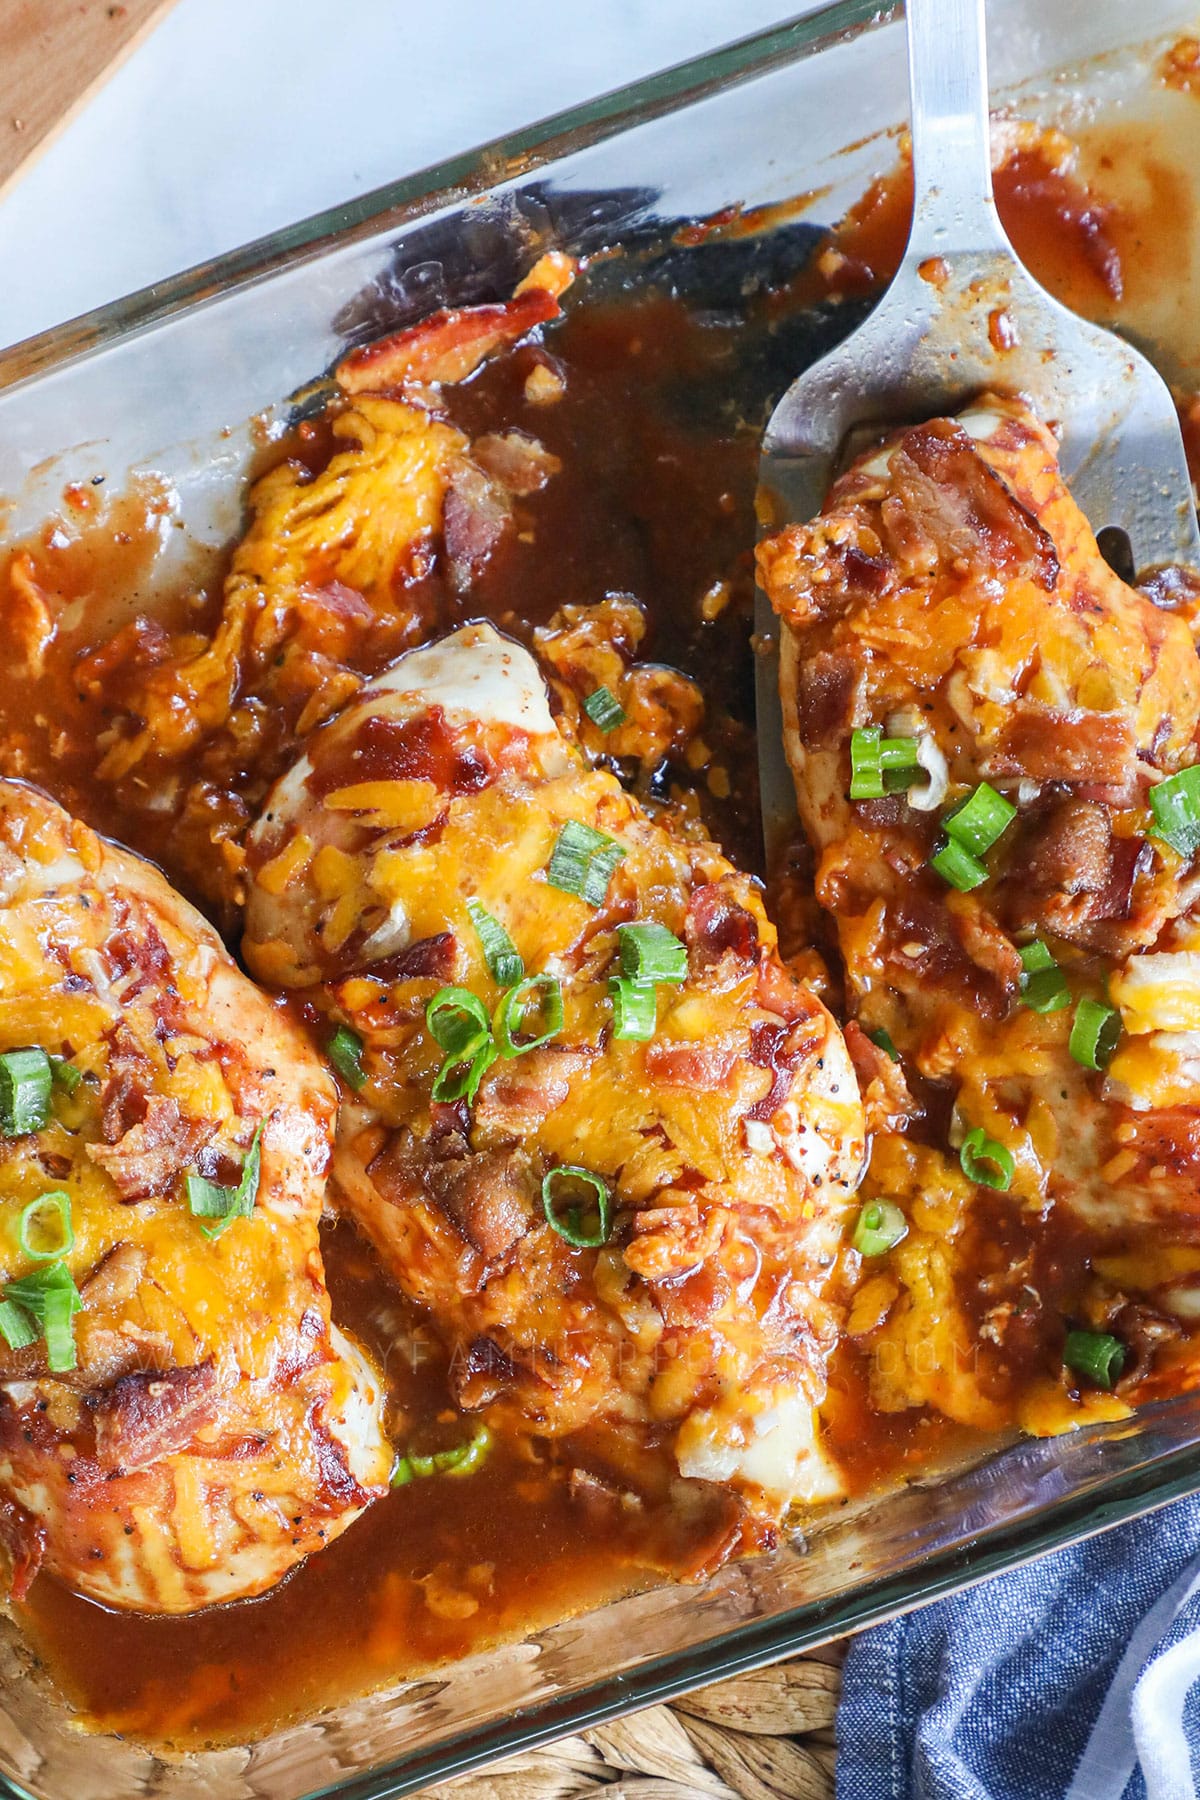 mesquite BBQ chicken bake is a one dish recipe